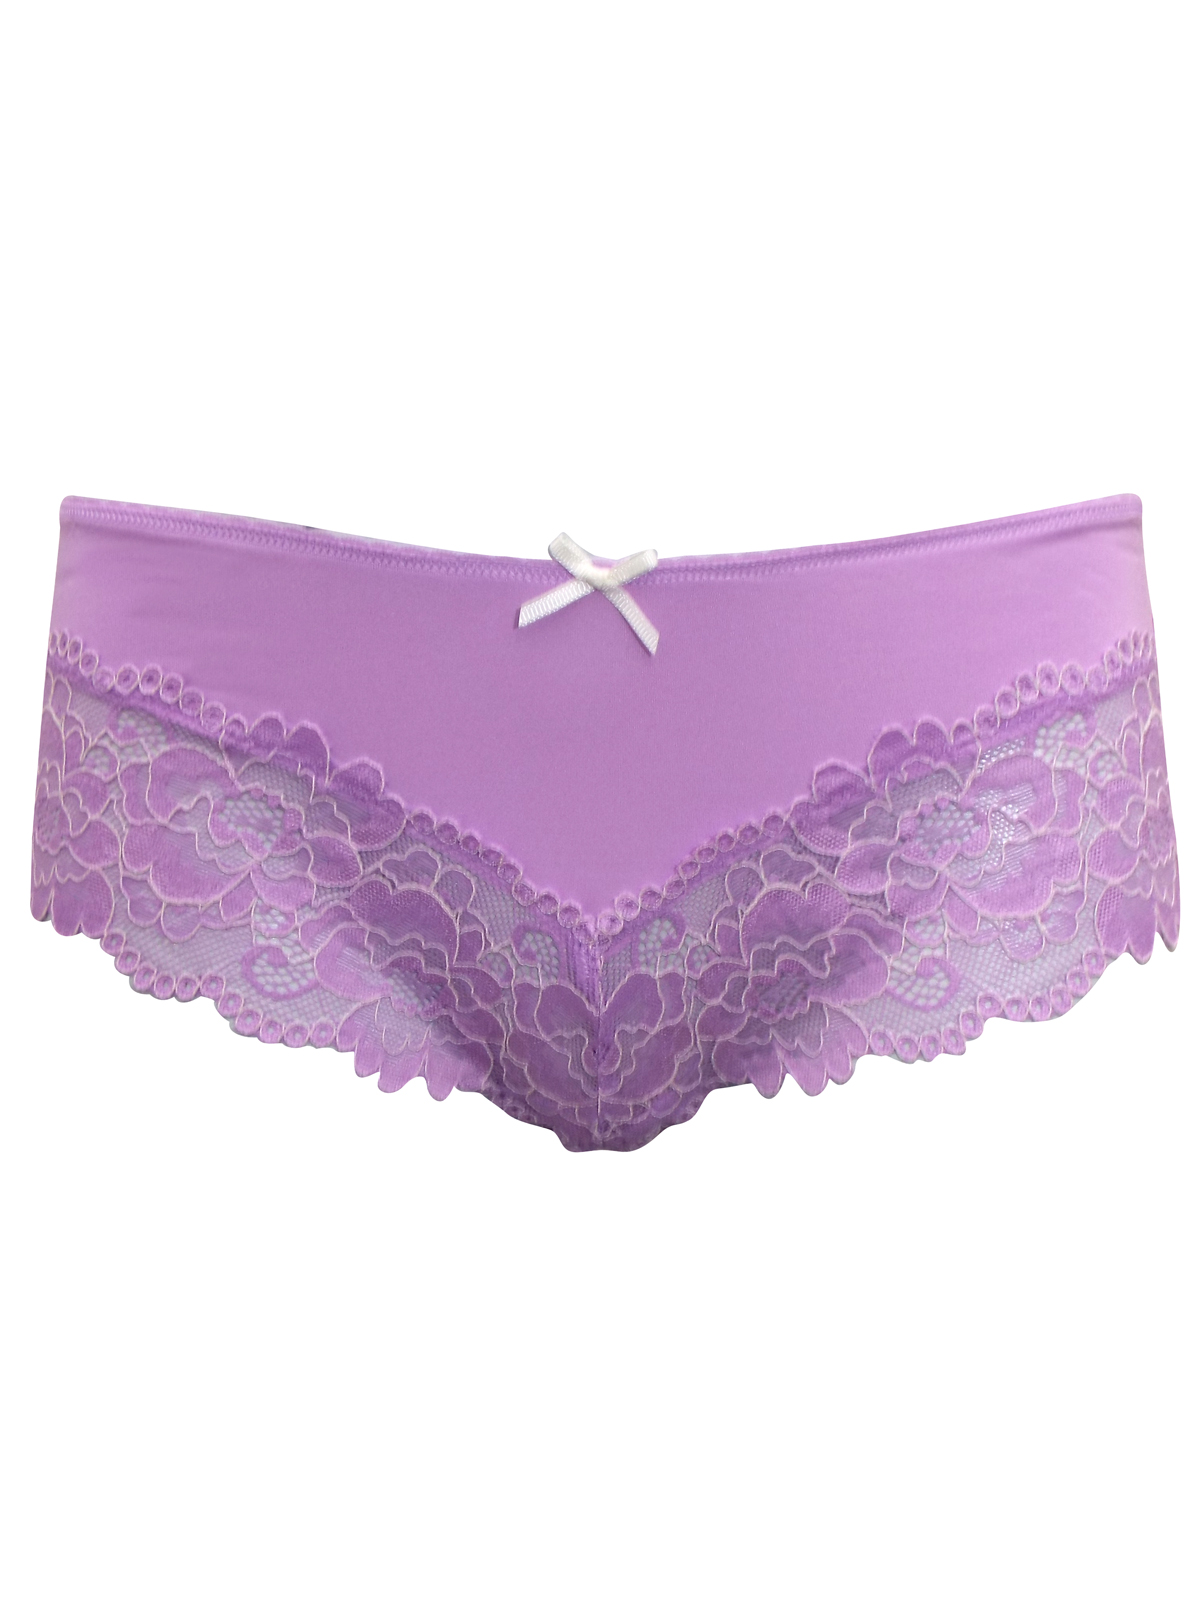 Marks and Spencer - - M&5 LILAC Lace Trim Low Rise Brazilian Knickers ...